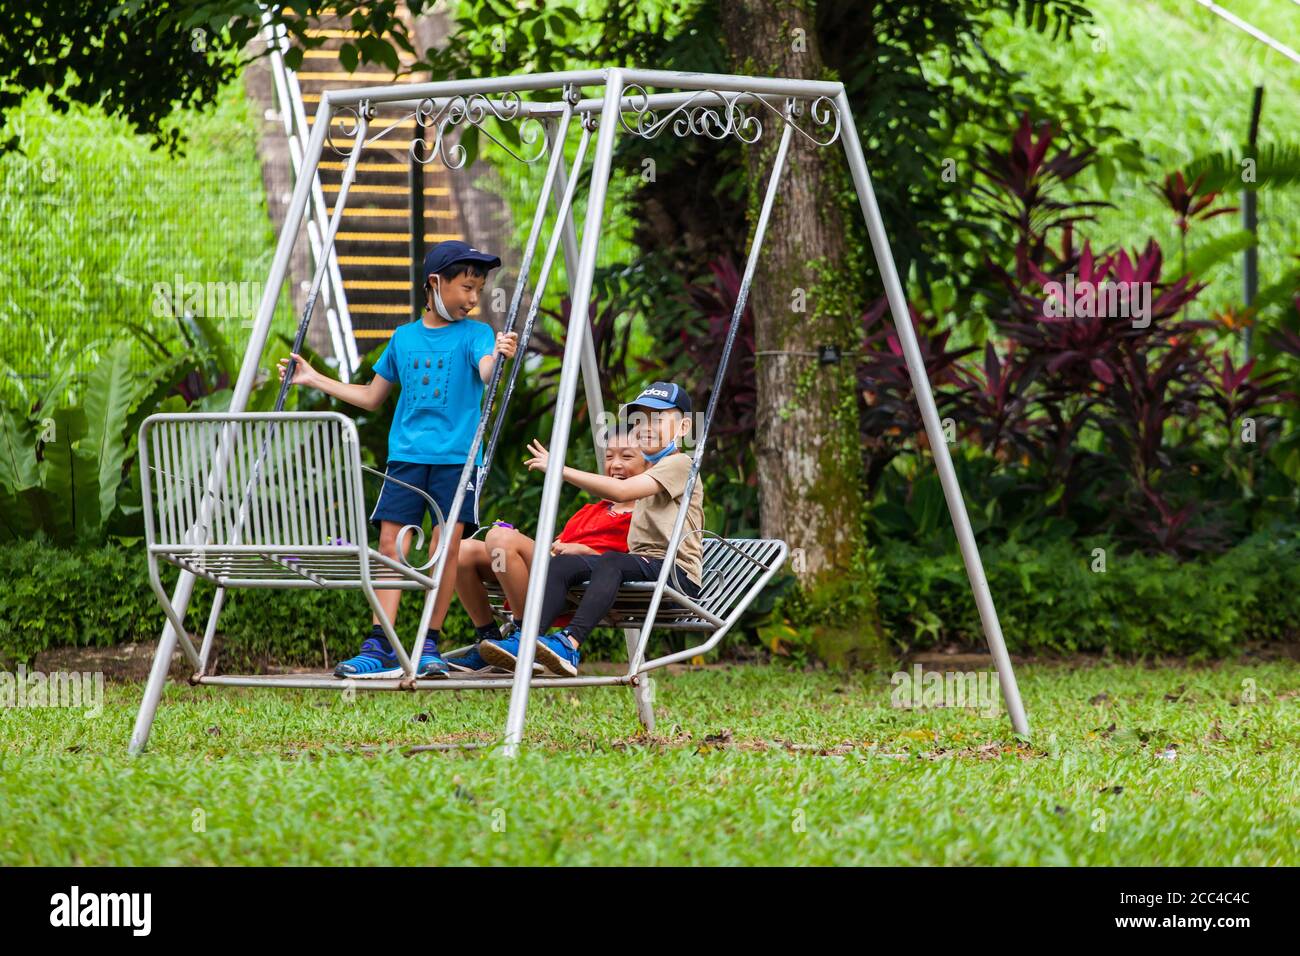 Three japanese asia boys playing on the swing having fun at outdoor location. Stock Photo